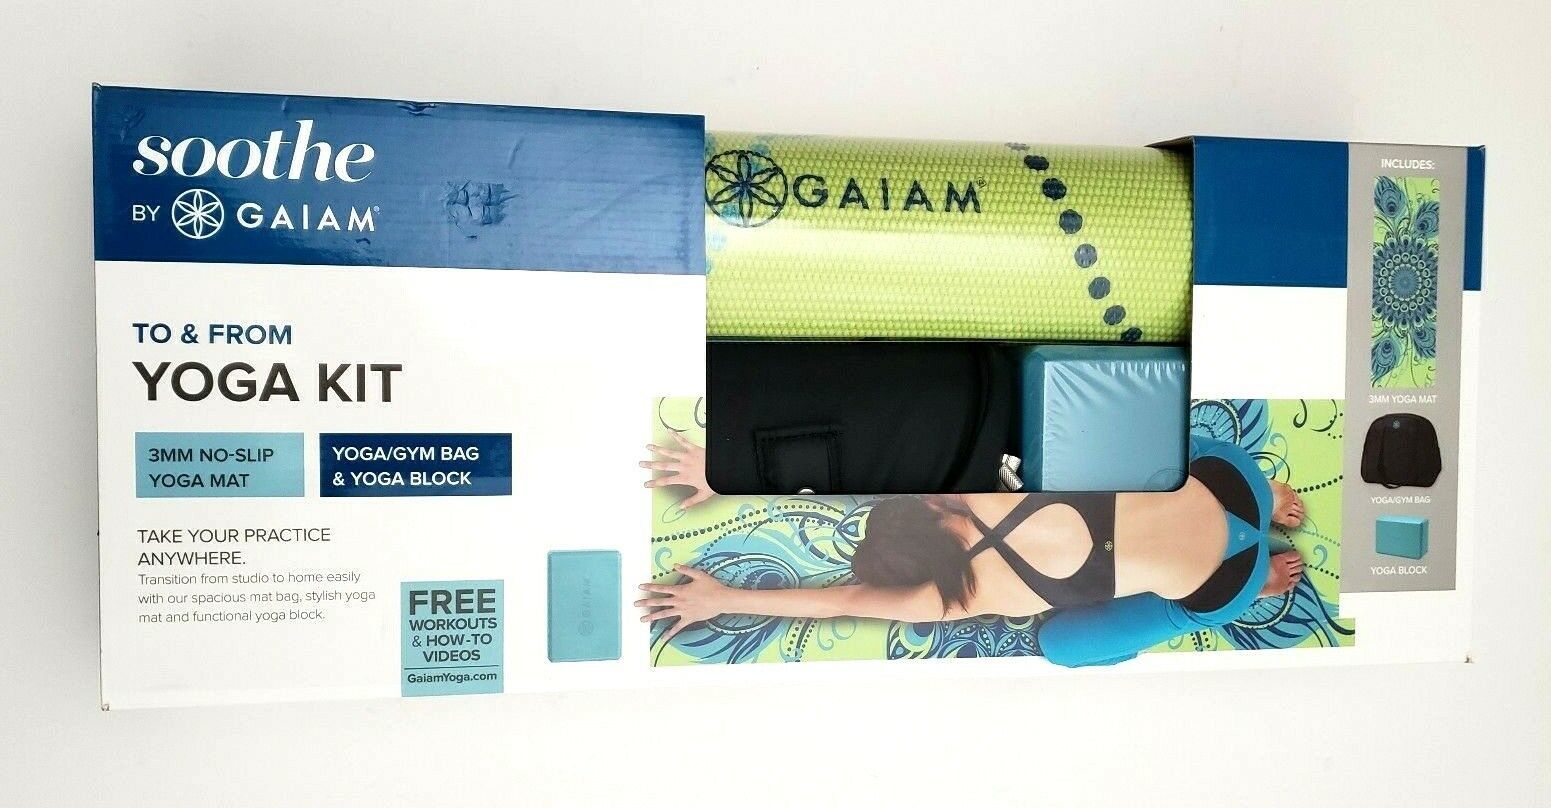 Soothe by Gaiam To & From Yoga Kit w/Videos Lime/Teal 24"W x 68"L - $45.53